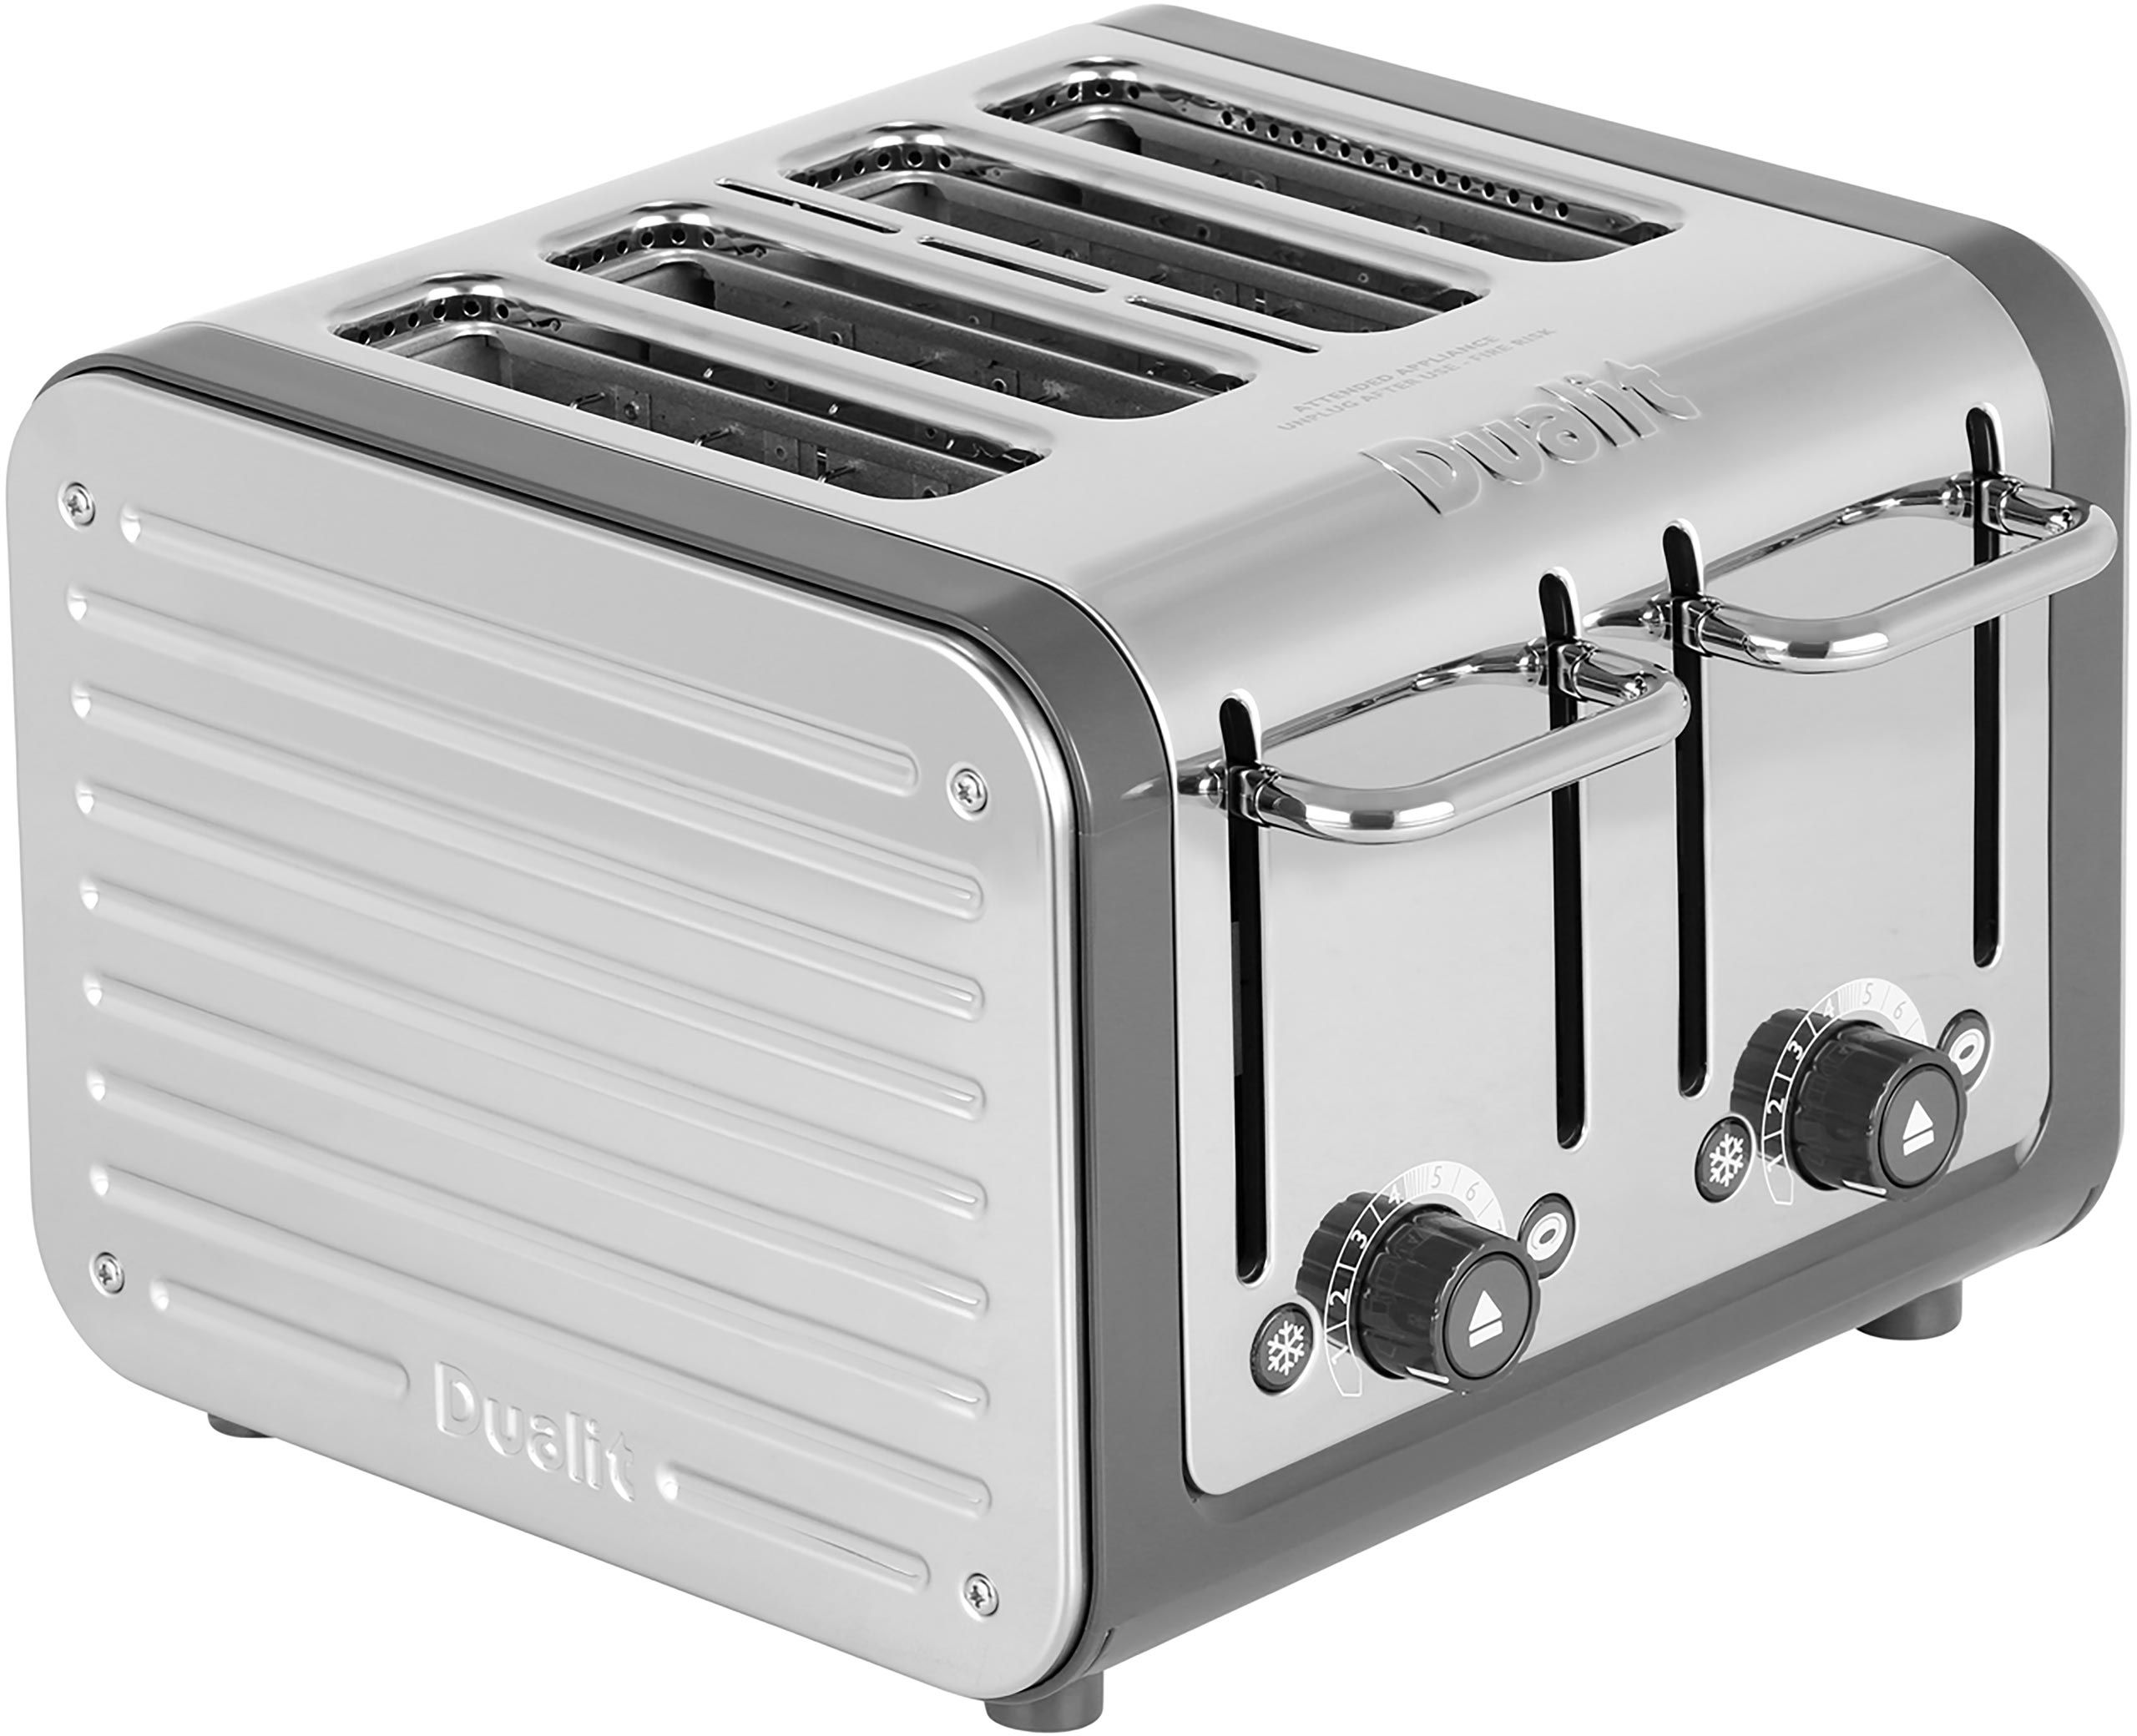 Dualit Architect 46526 4 Slice Toaster - Stainless Steel, Stainless Steel